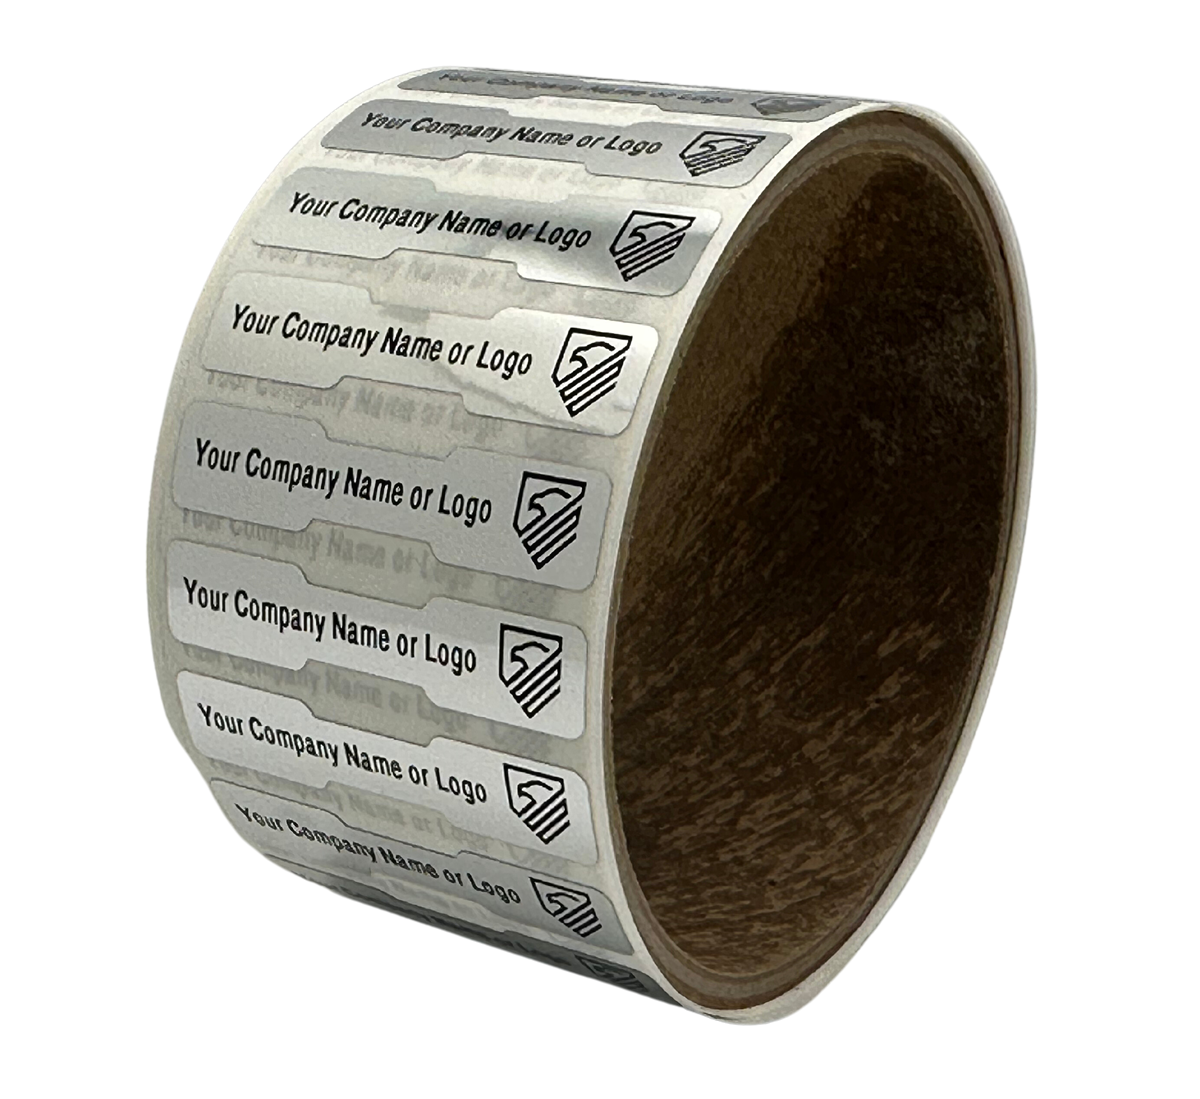 2,000 Tamper Evident Security Labels Silver Chrome TamperVoidPro Seal Sticker, Dogbone Shape Size 1.75" x 0.375 (44mm x 9mm). Custom Printed. >Click on item details to customize.